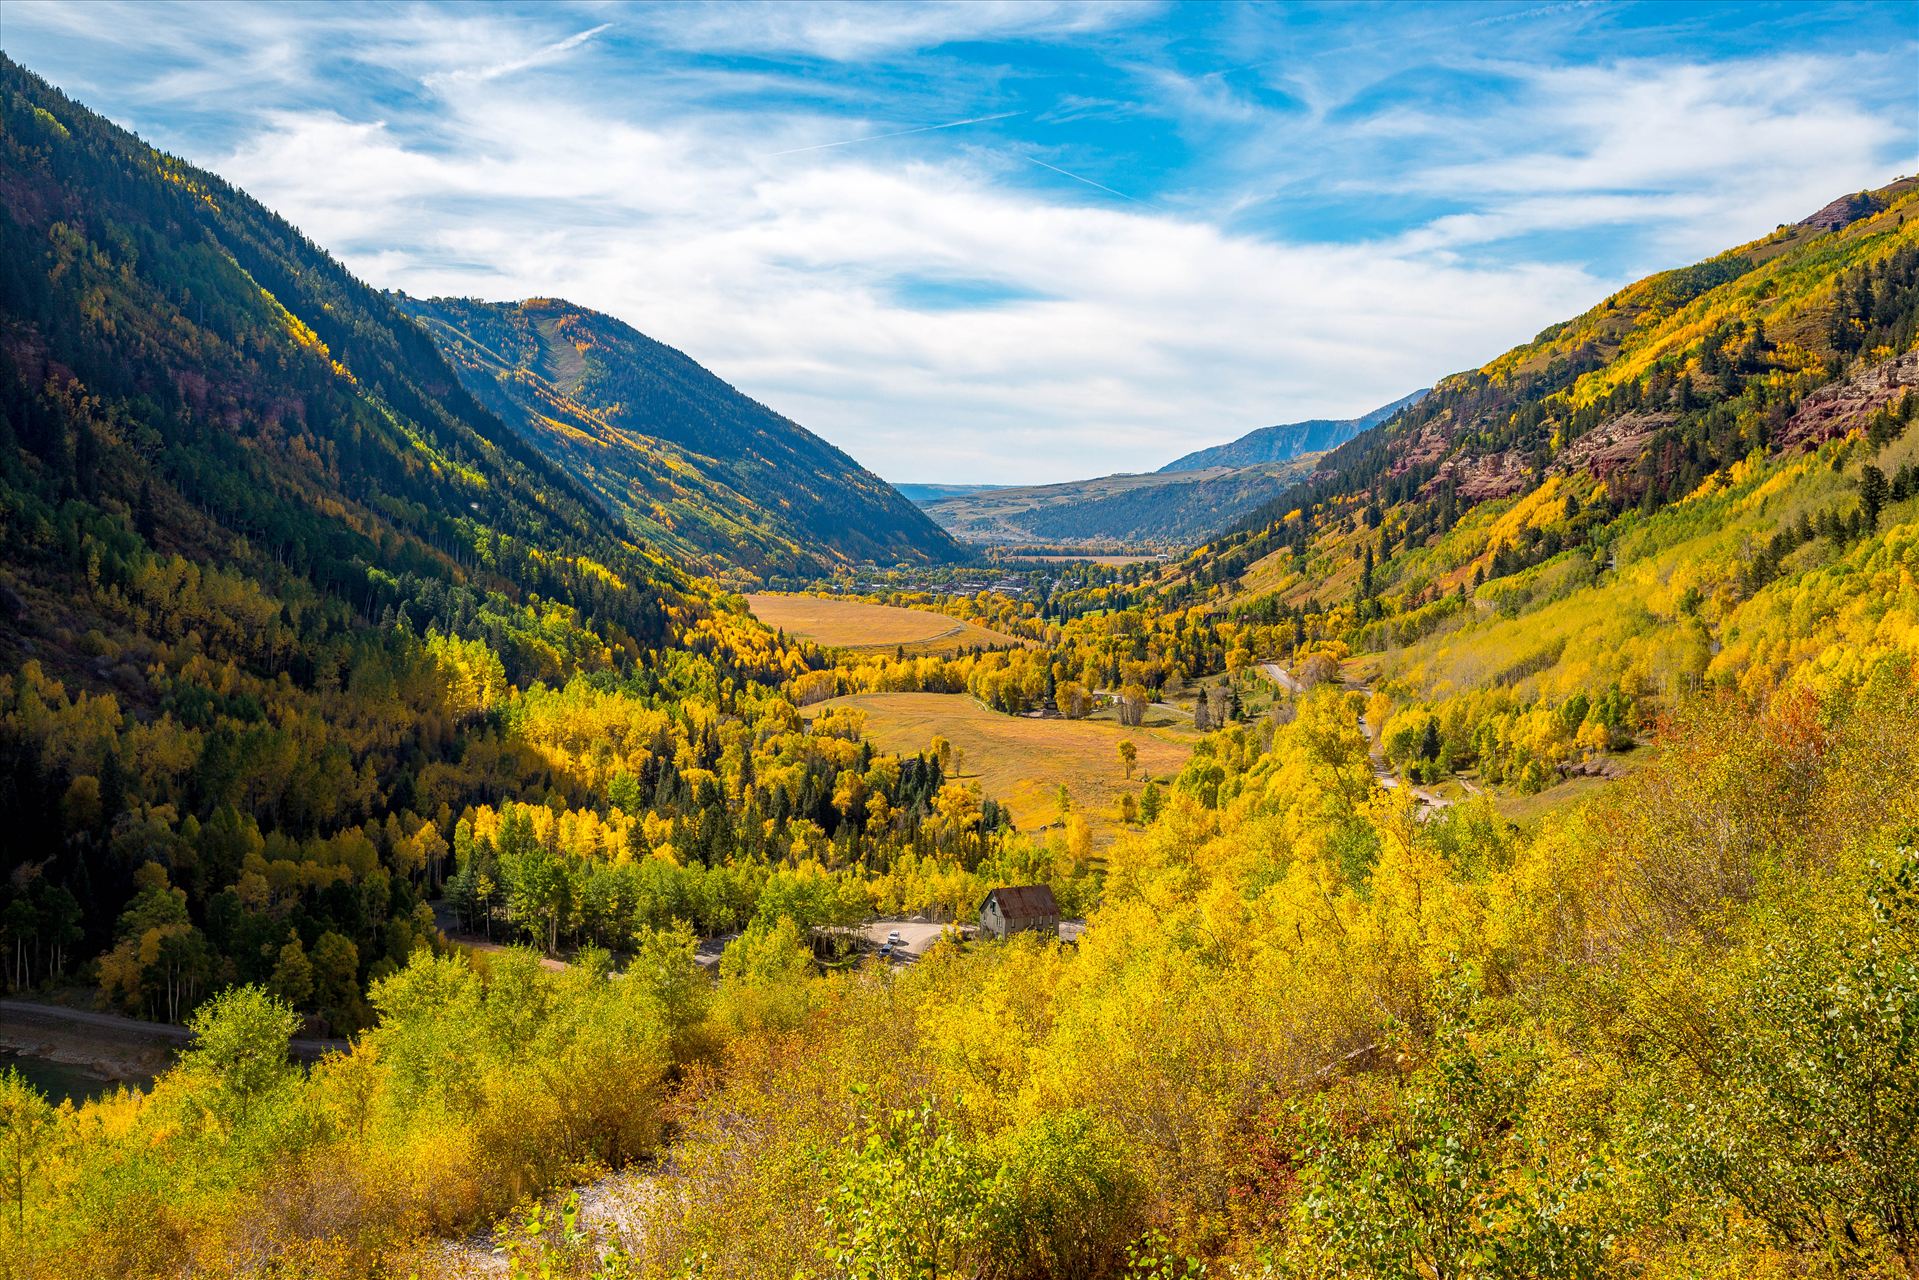 Ophir Pass 4 - Ophir Pass, between Ouray and Silverton Colorado in the fall. by Scott Smith Photos